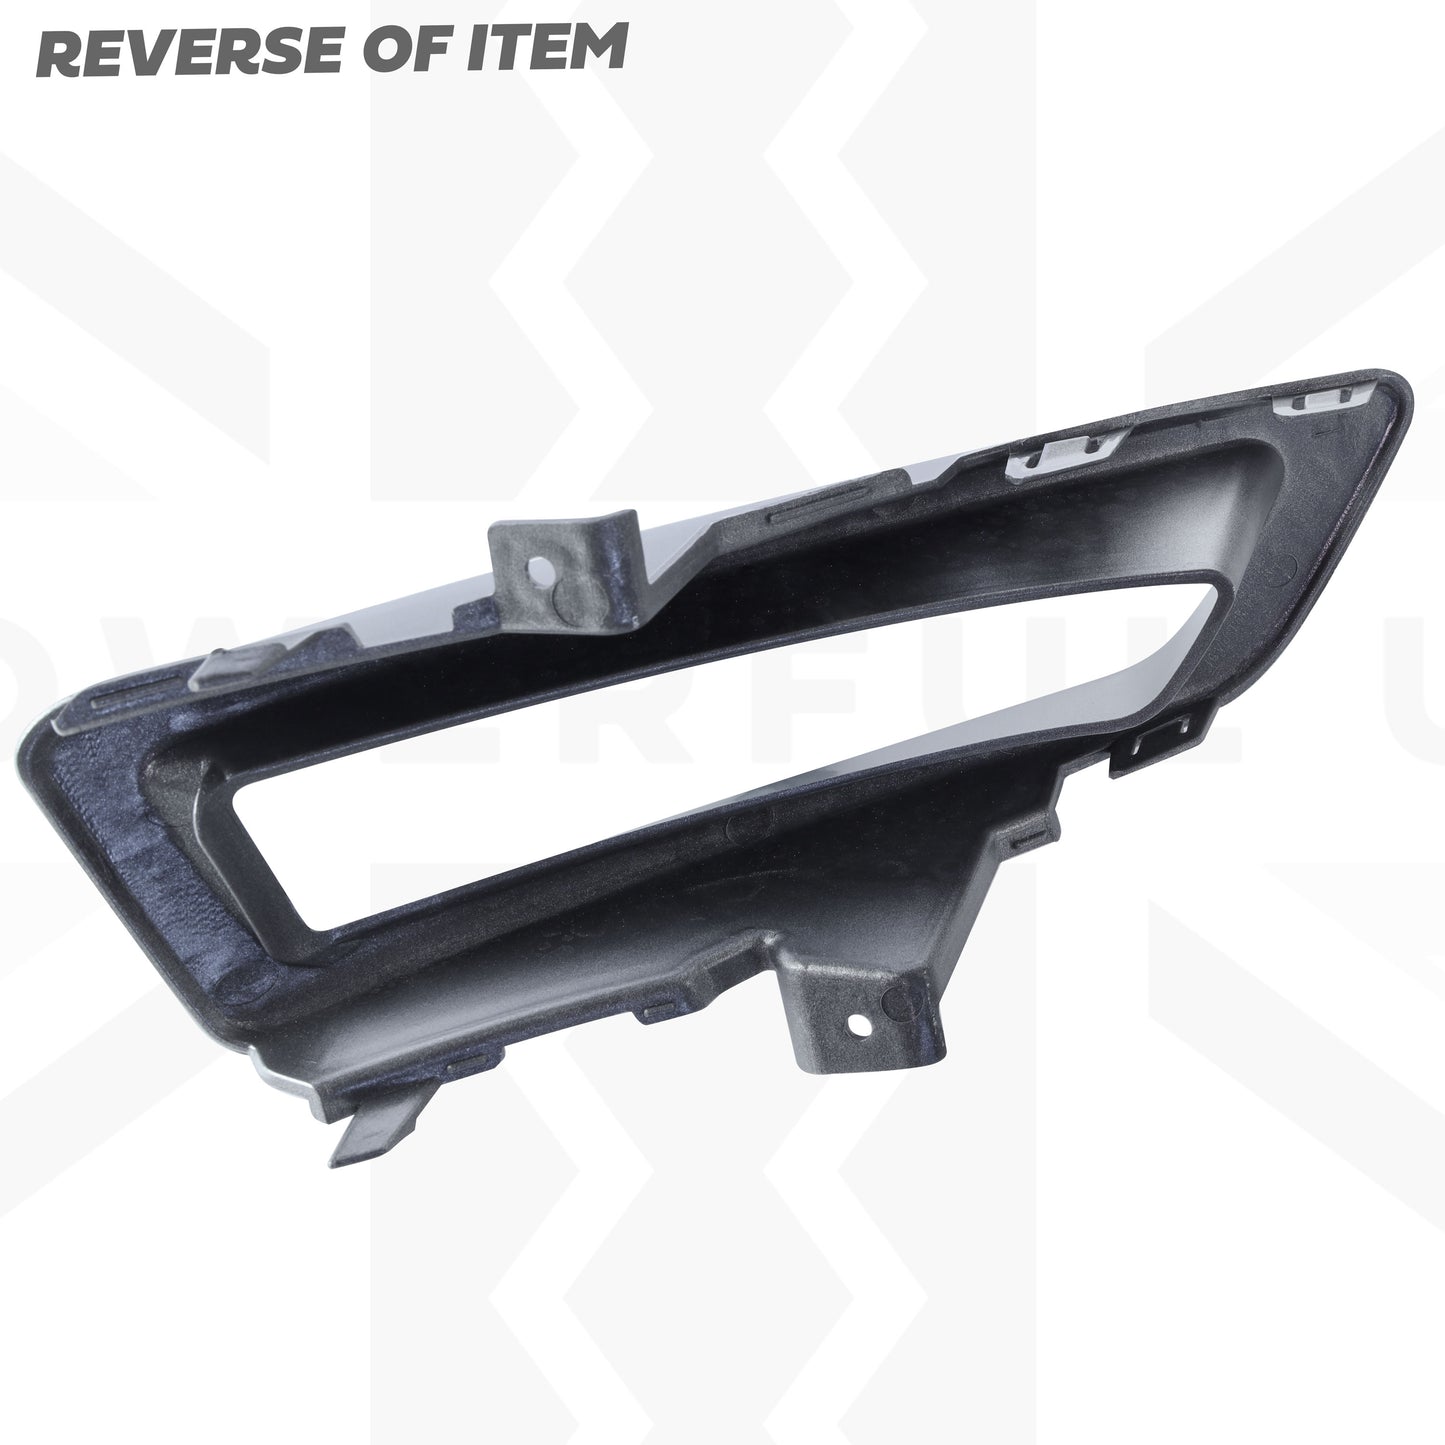 Silver Fog Light Surround for Land Rover Discovery Sport 2015-19 - Left